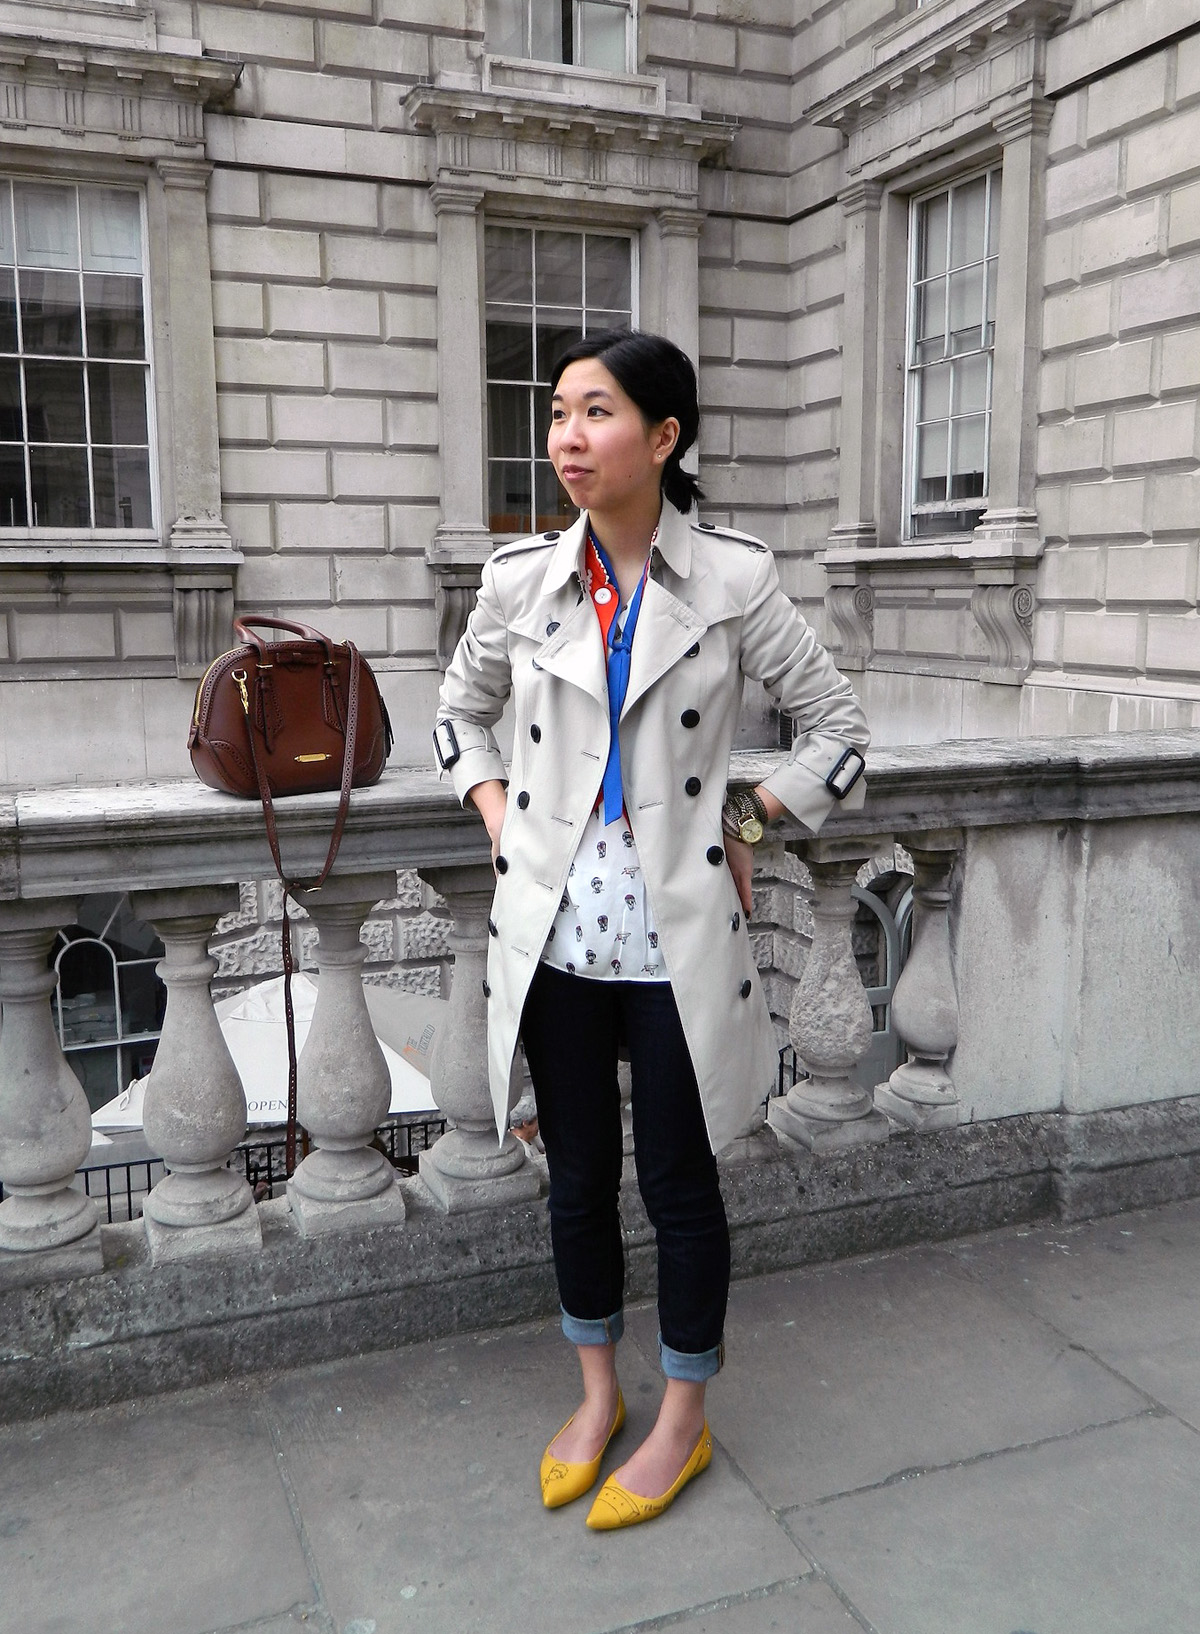 Christine at Somerset House, outside of The Courtauld. All photos by Jennifer Potter.